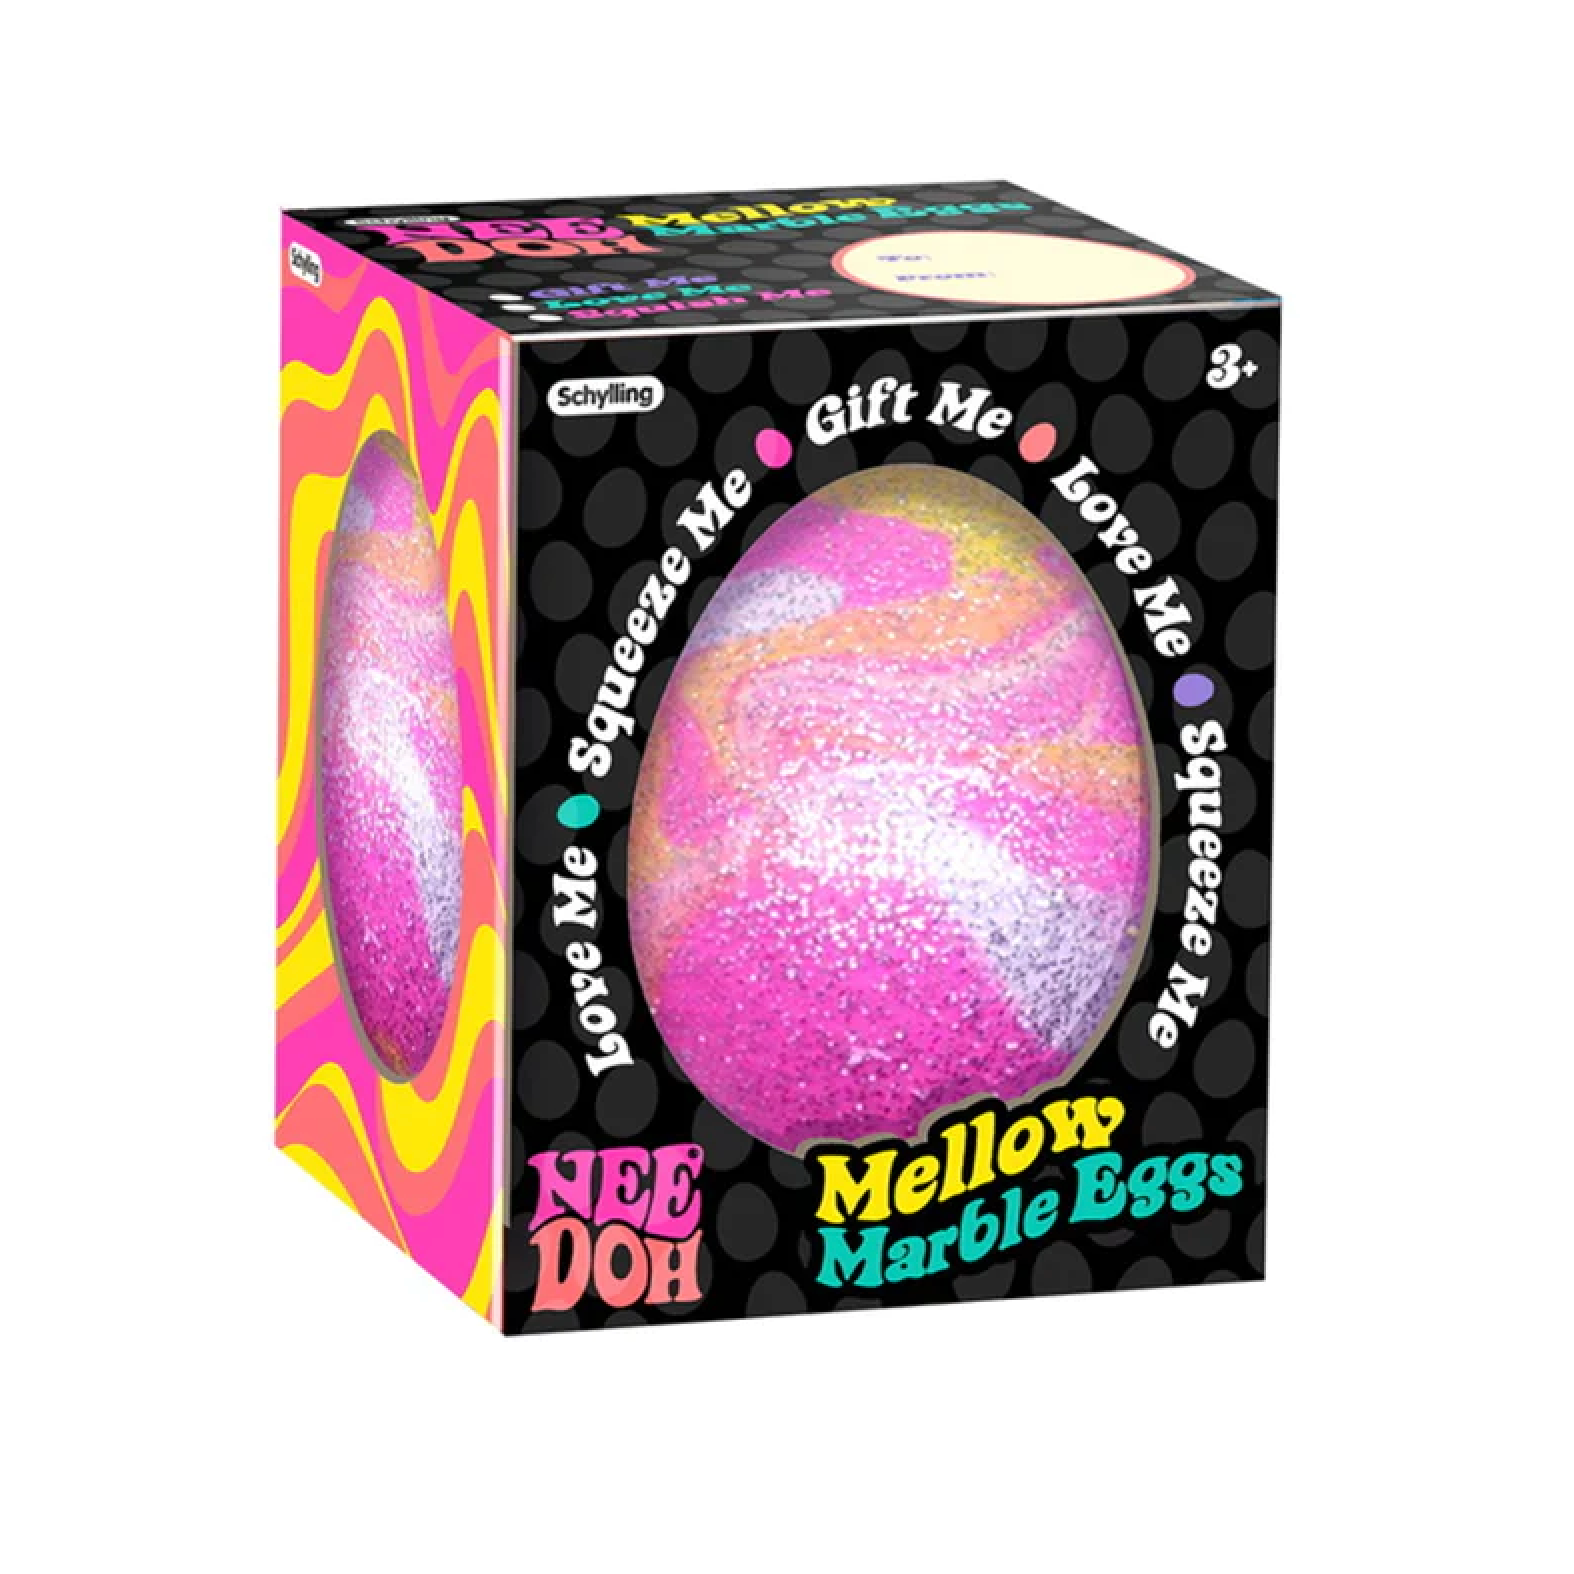 Schylling NeeDoh Mellow Marble Eggs - Swirly Decorated Eggs You Can Squish!-SCHYLLING-Little Giant Kidz